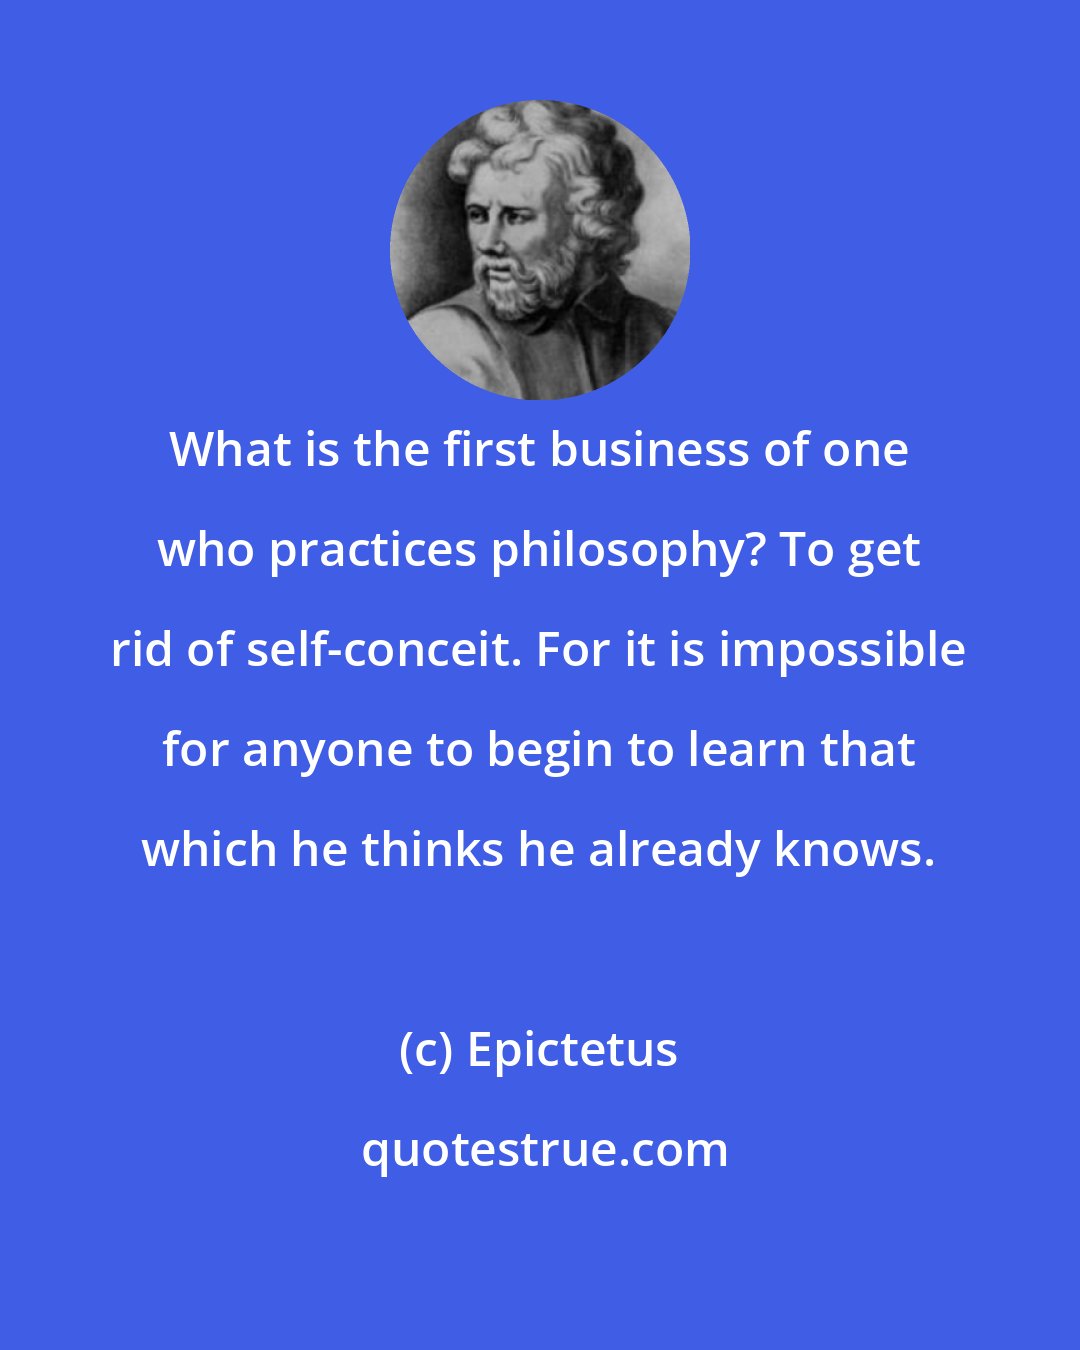 Epictetus: What is the first business of one who practices philosophy? To get rid of self-conceit. For it is impossible for anyone to begin to learn that which he thinks he already knows.